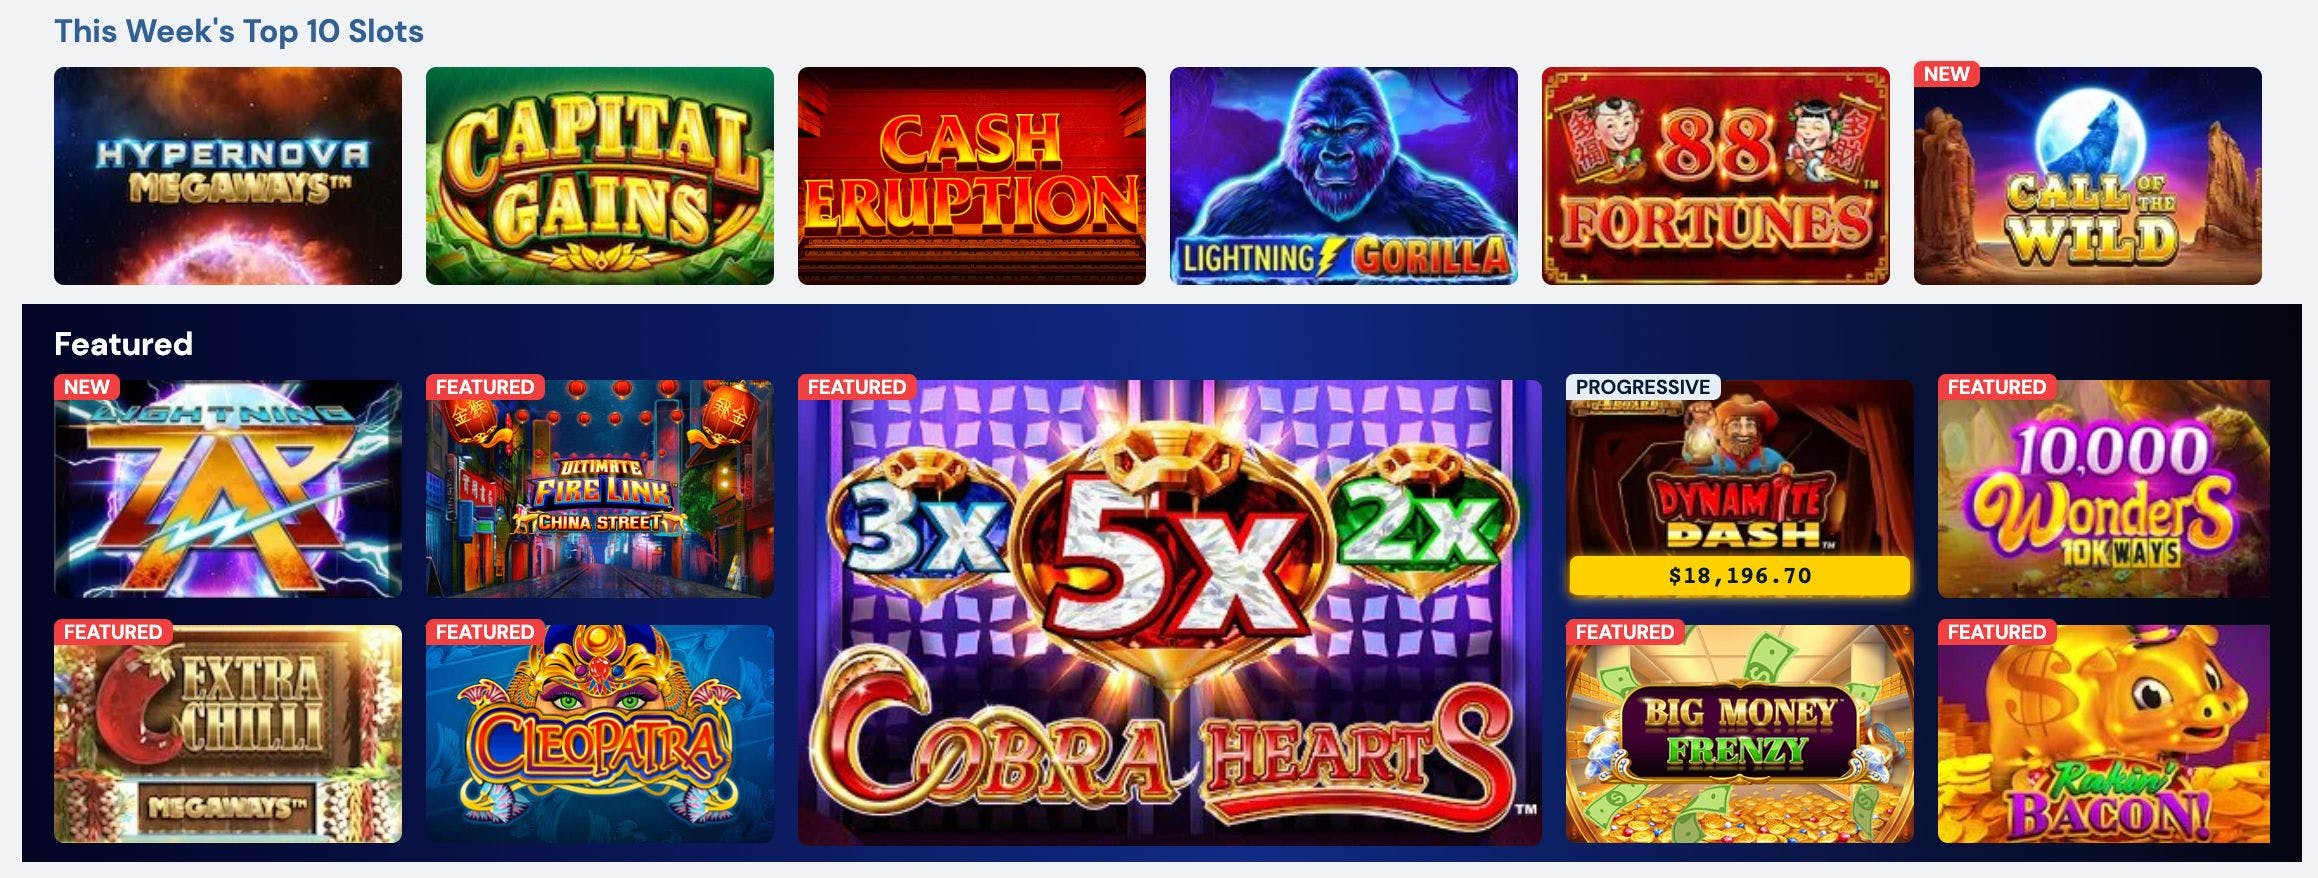 Image showing the top 10 slots as listed on BetRivers Casino